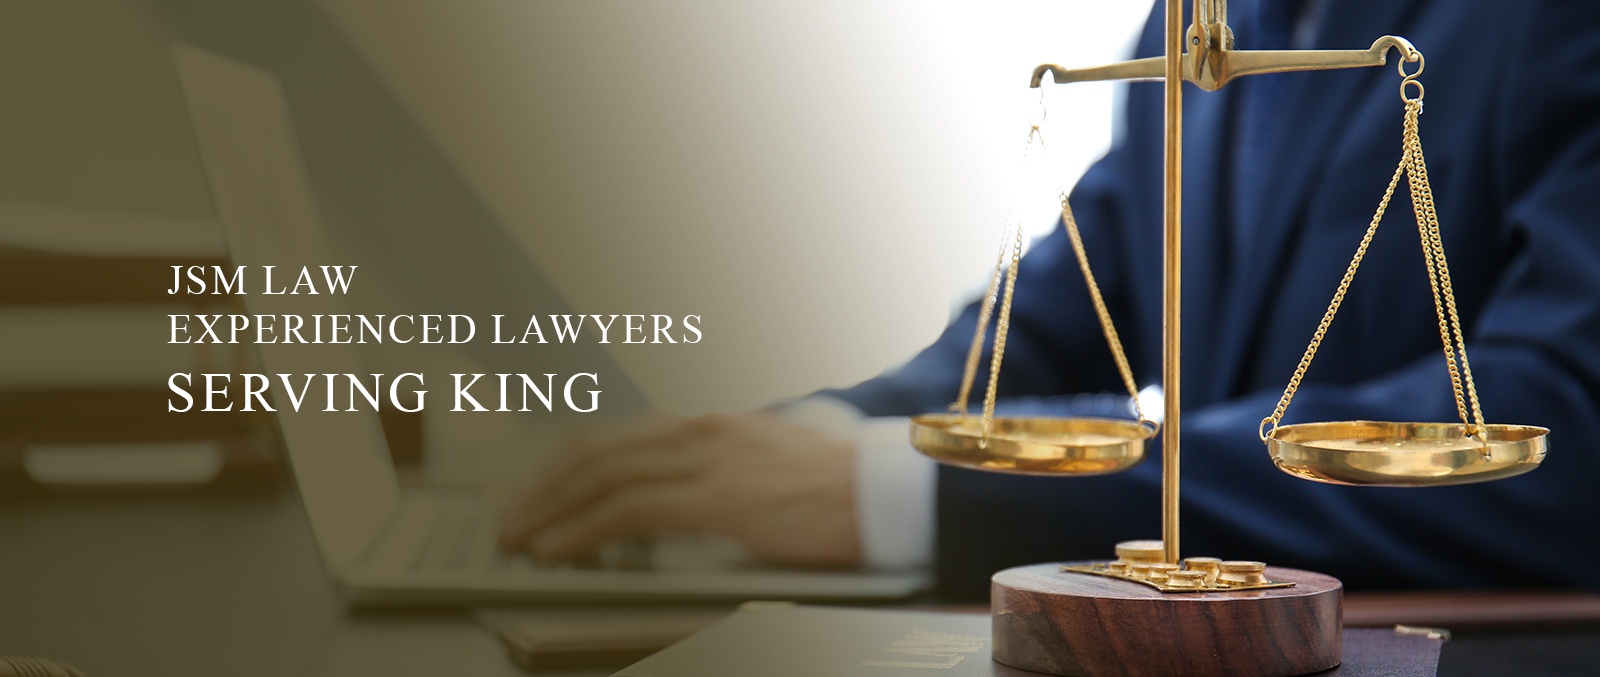 CORPORATE, CRIMINAL AND PERSONAL INJURY LAWYERS KING ON